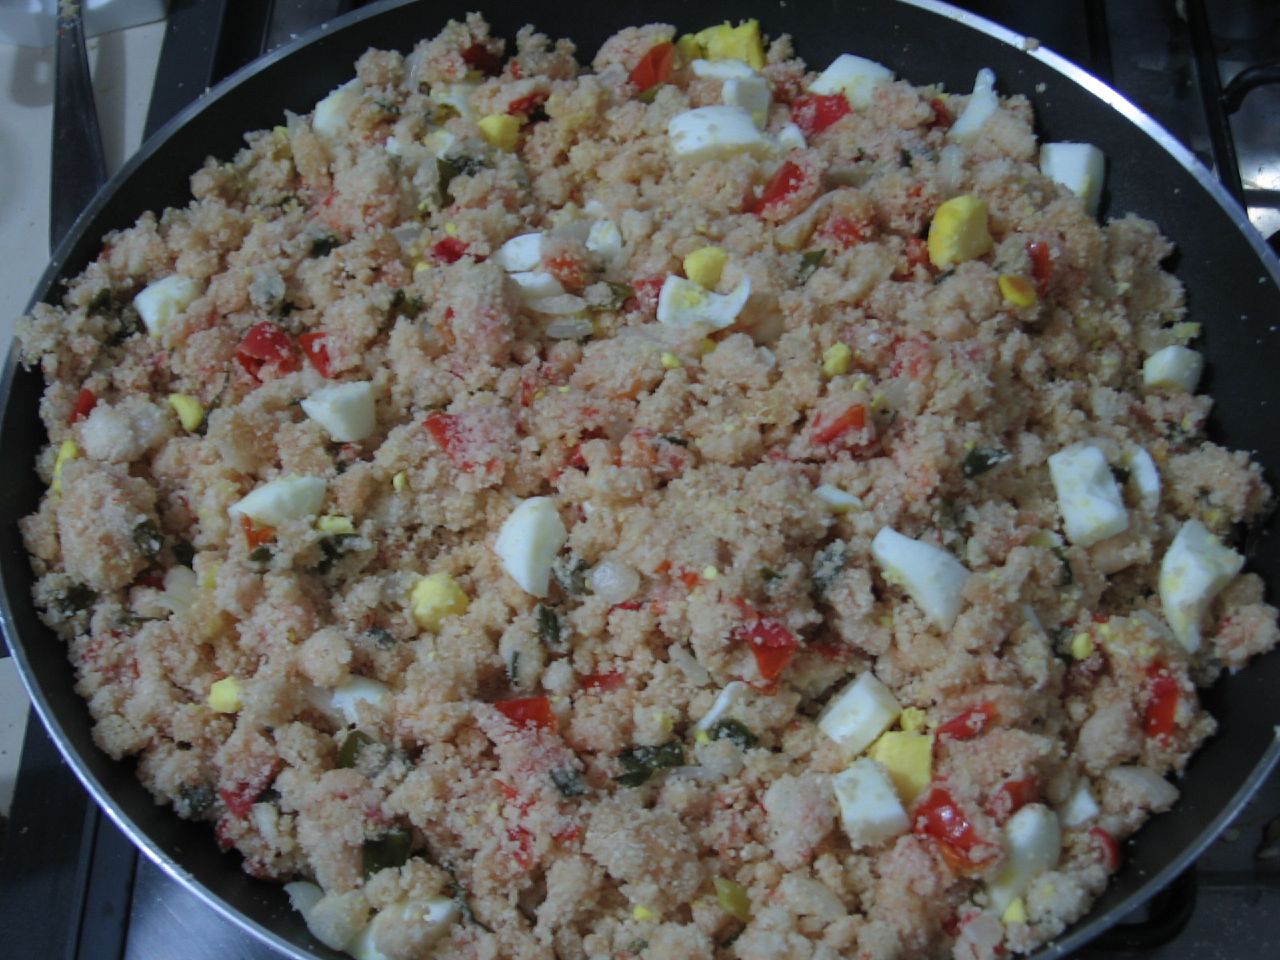 a mixture of vegetables and meat in a frying pan